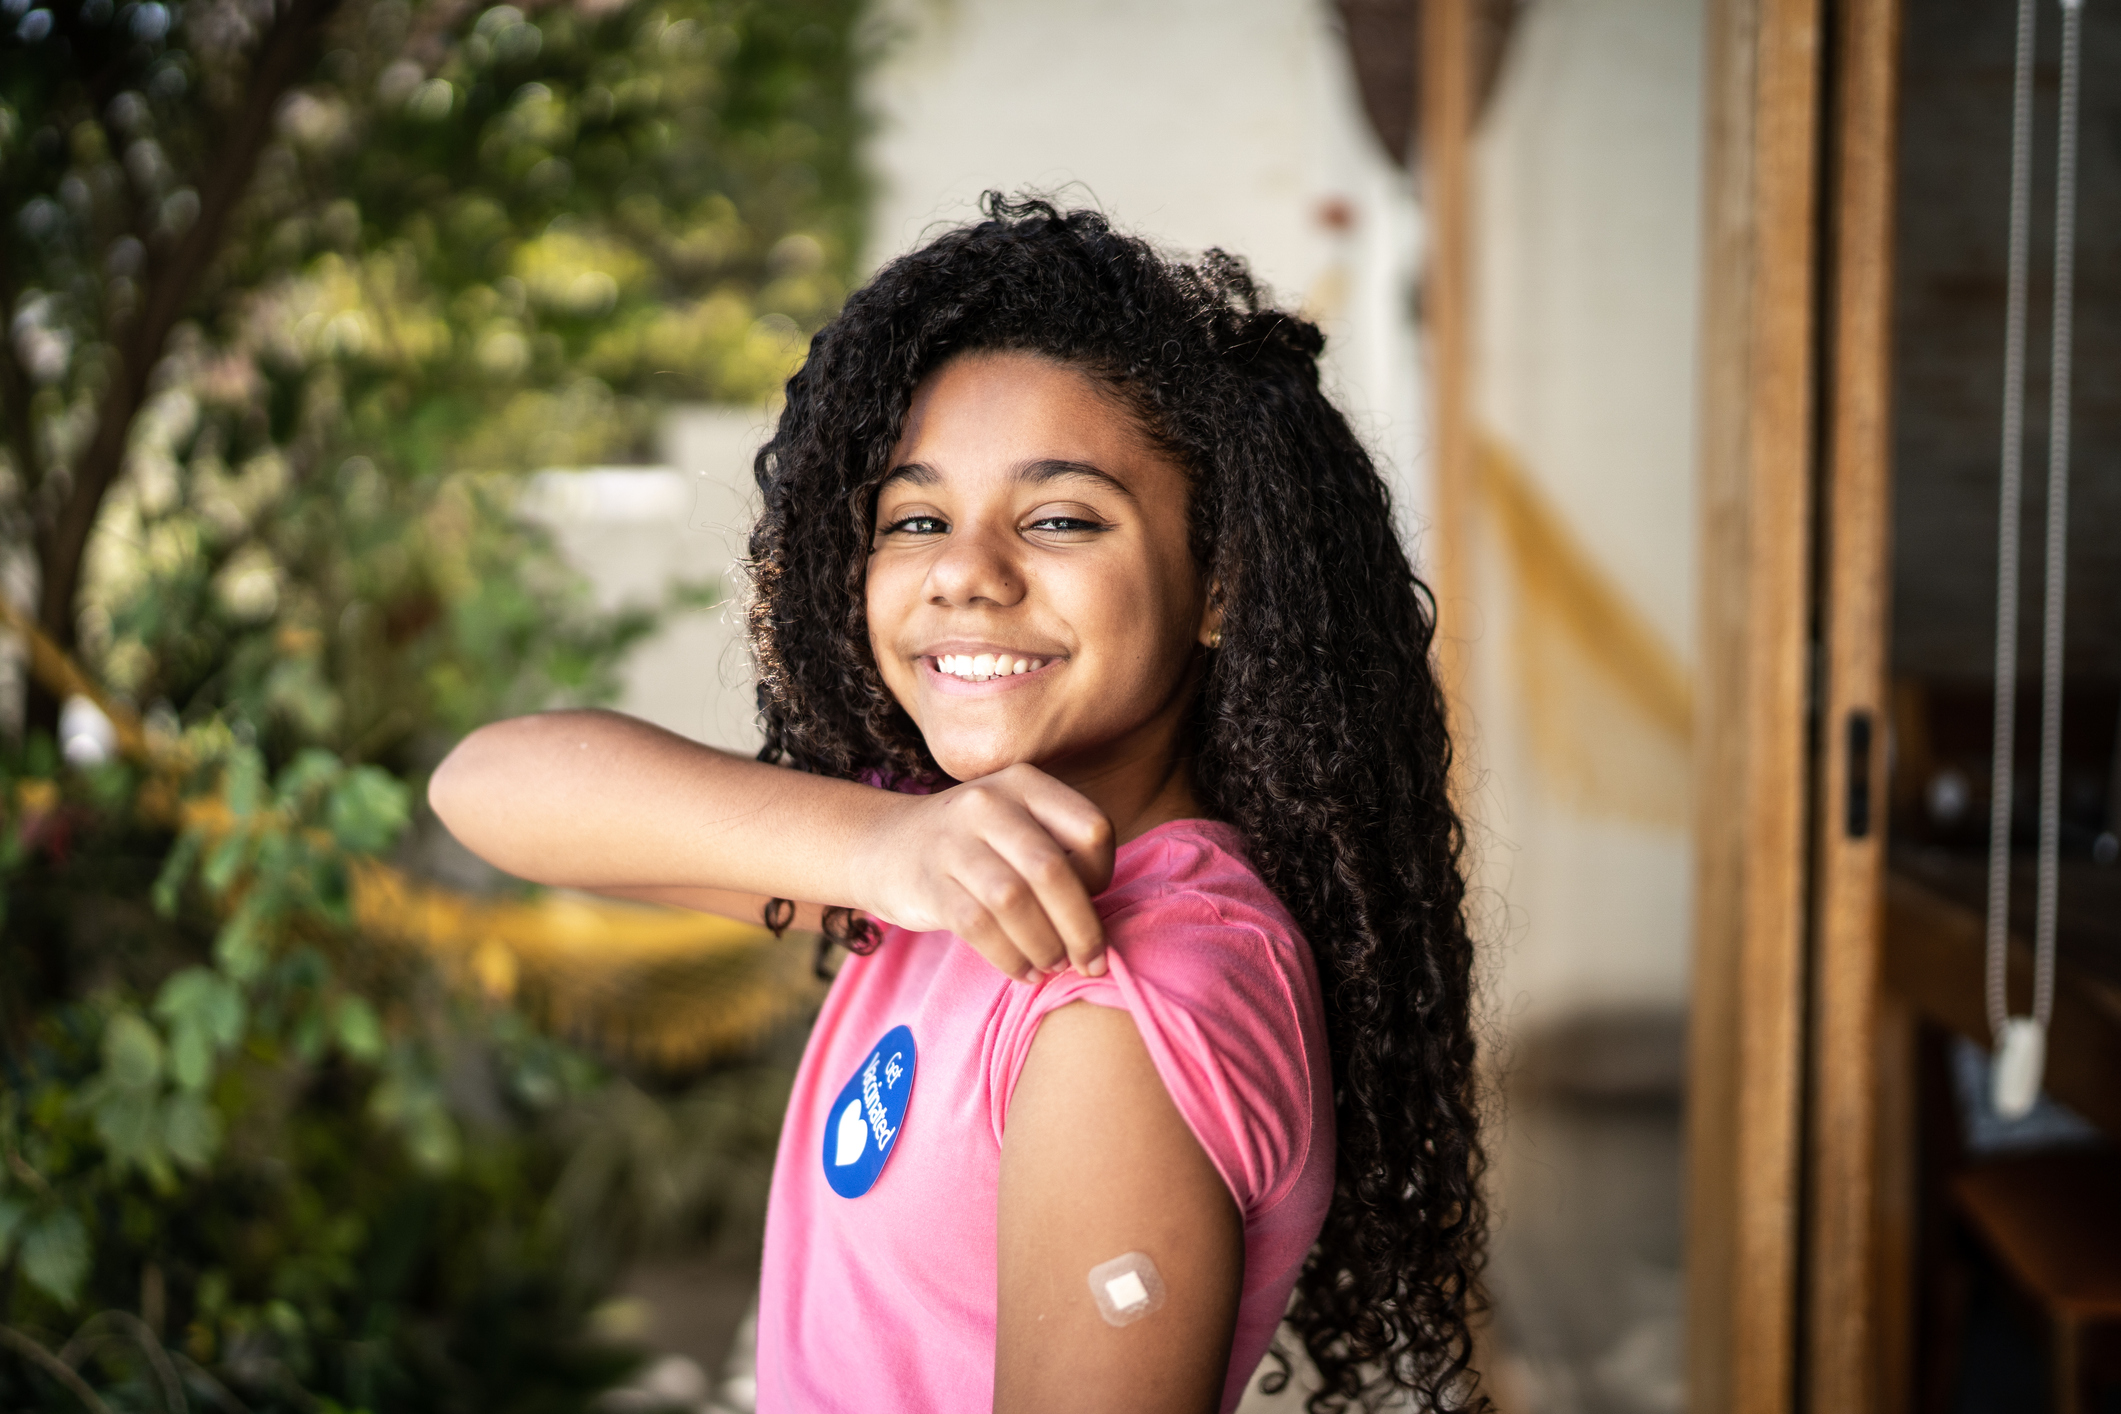 A smiling adolescent with medium skin tone rolls up the sleeve of a pink t-shirt to show off a small band-aid on the left arm. A sticker on the t-shirt reads "Get Vaccinated."